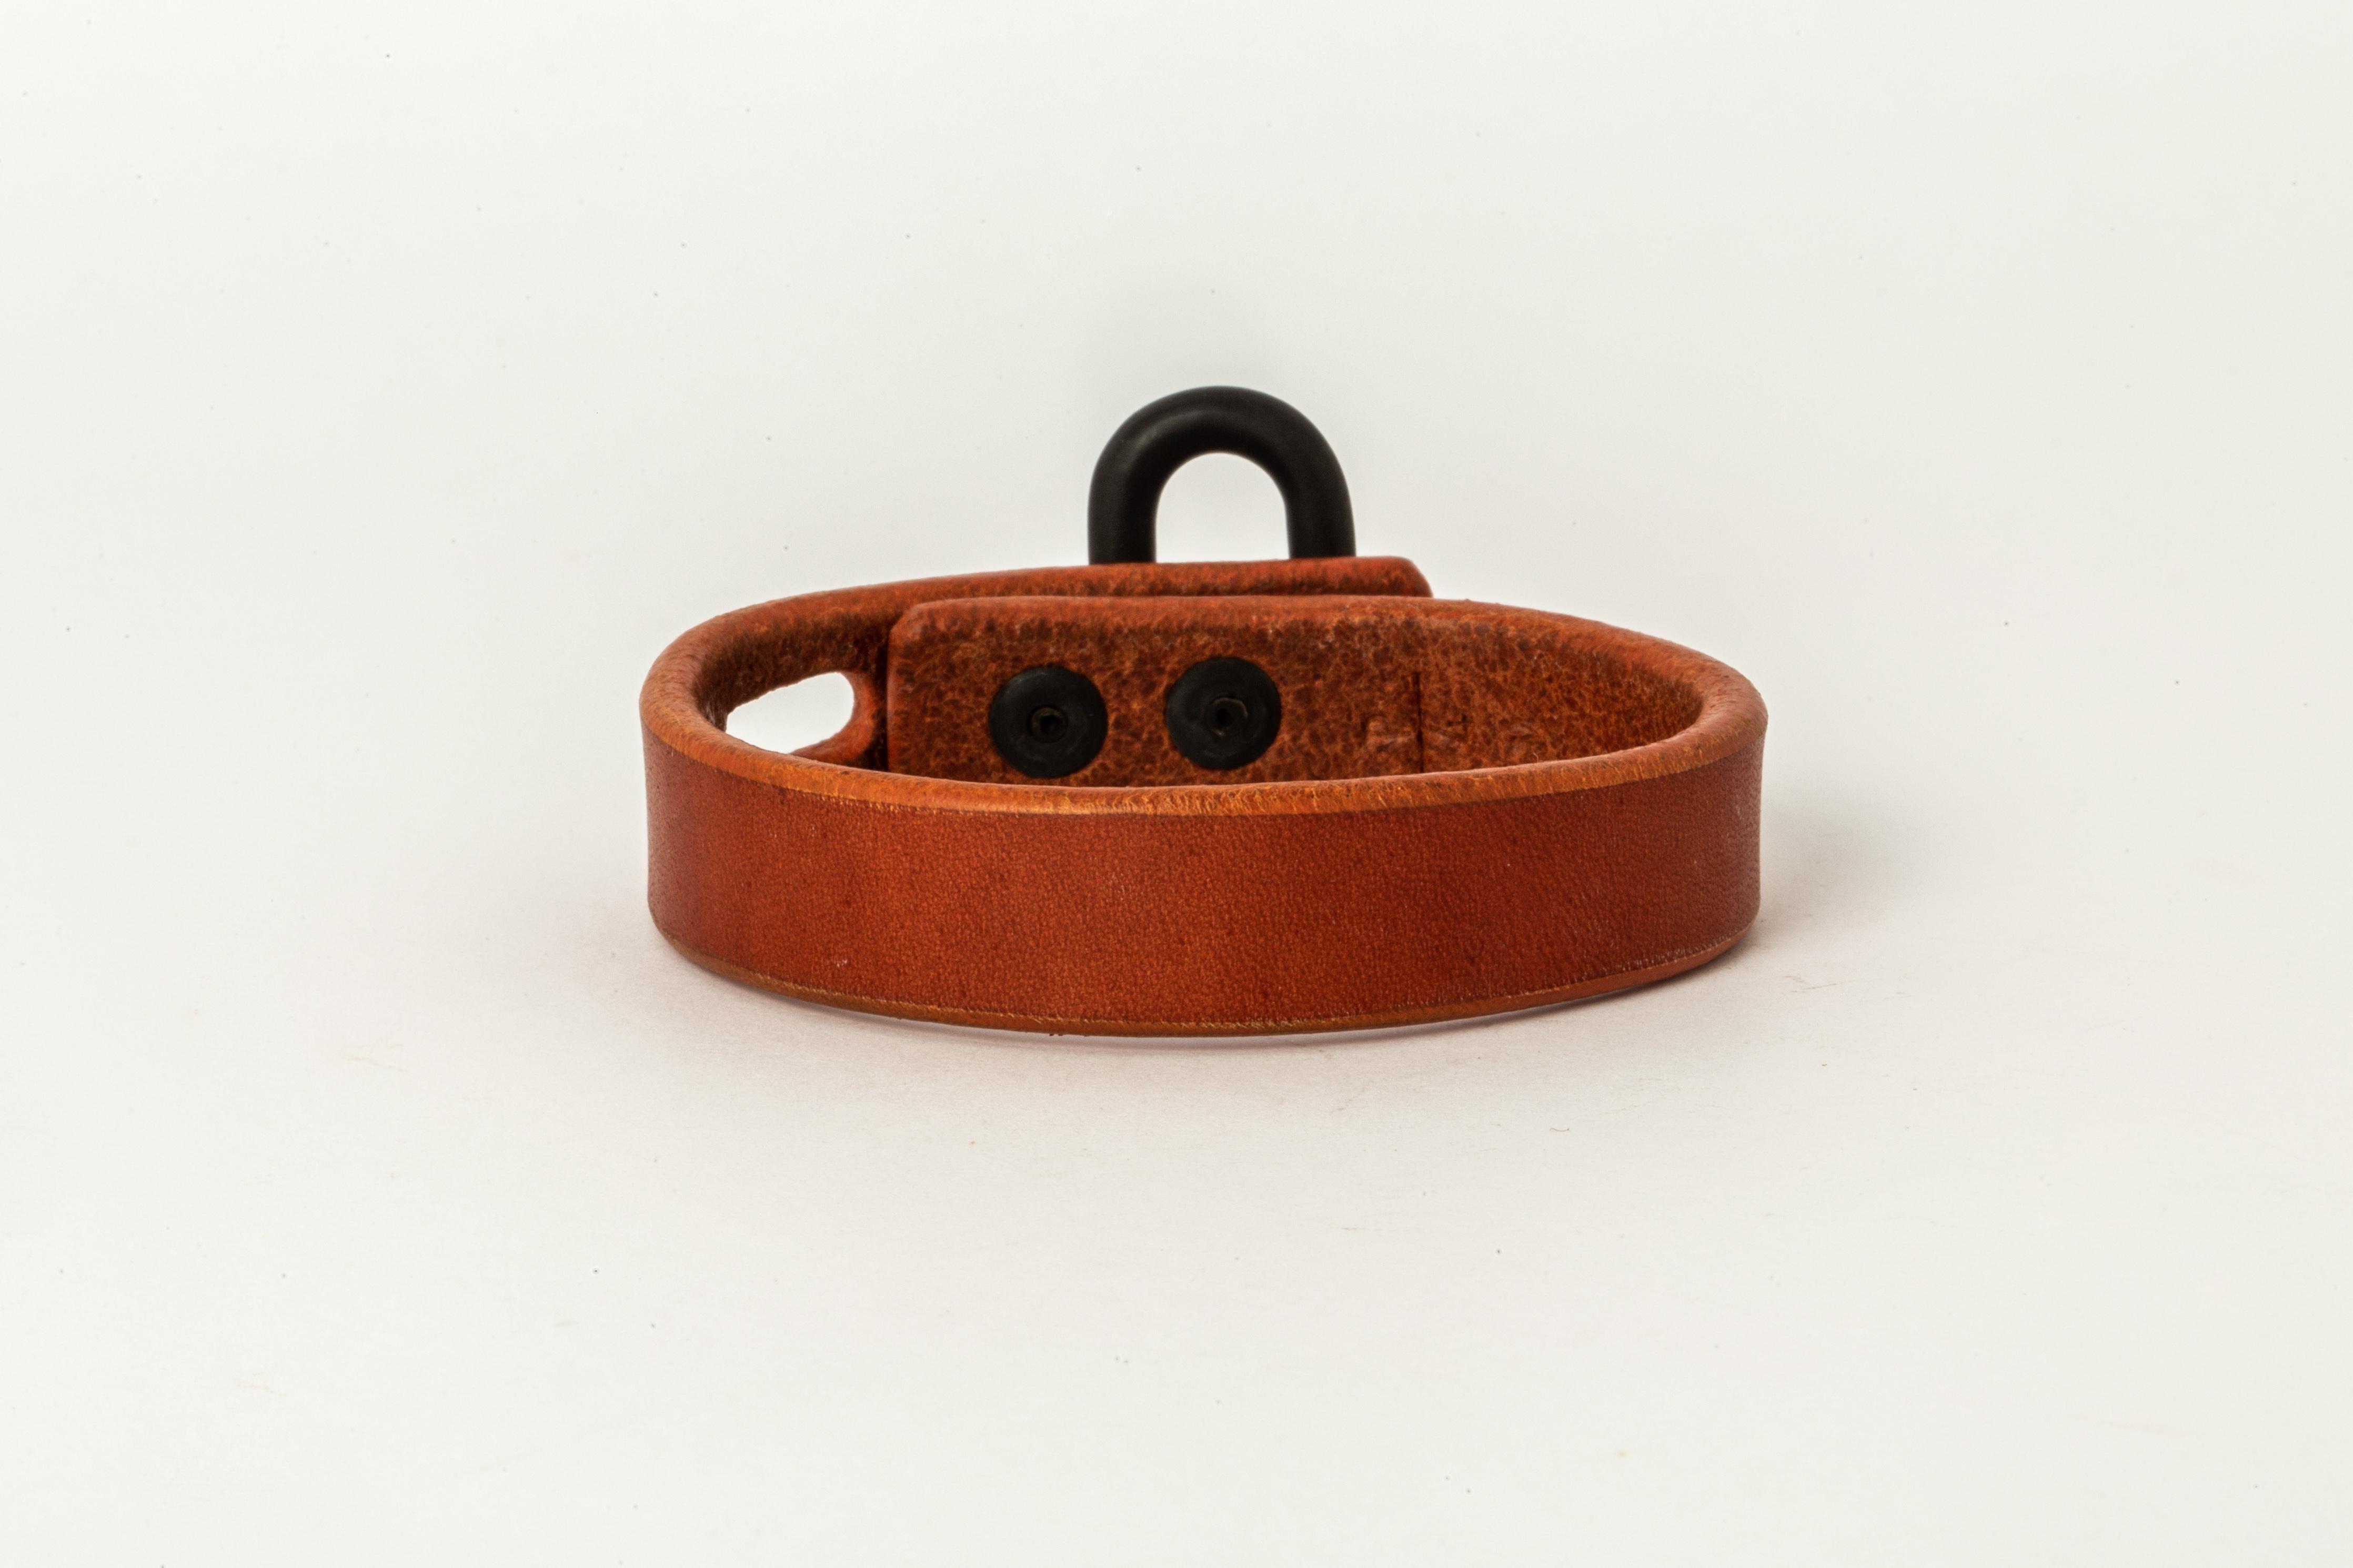 Bracelet in alezan buffalo leather and heat treated bronze. Items with the potential use as restraints. All P4X hardware and accessories are compatible and interchangeable.
The Charm System is an interrelated group of products that can be mixed and